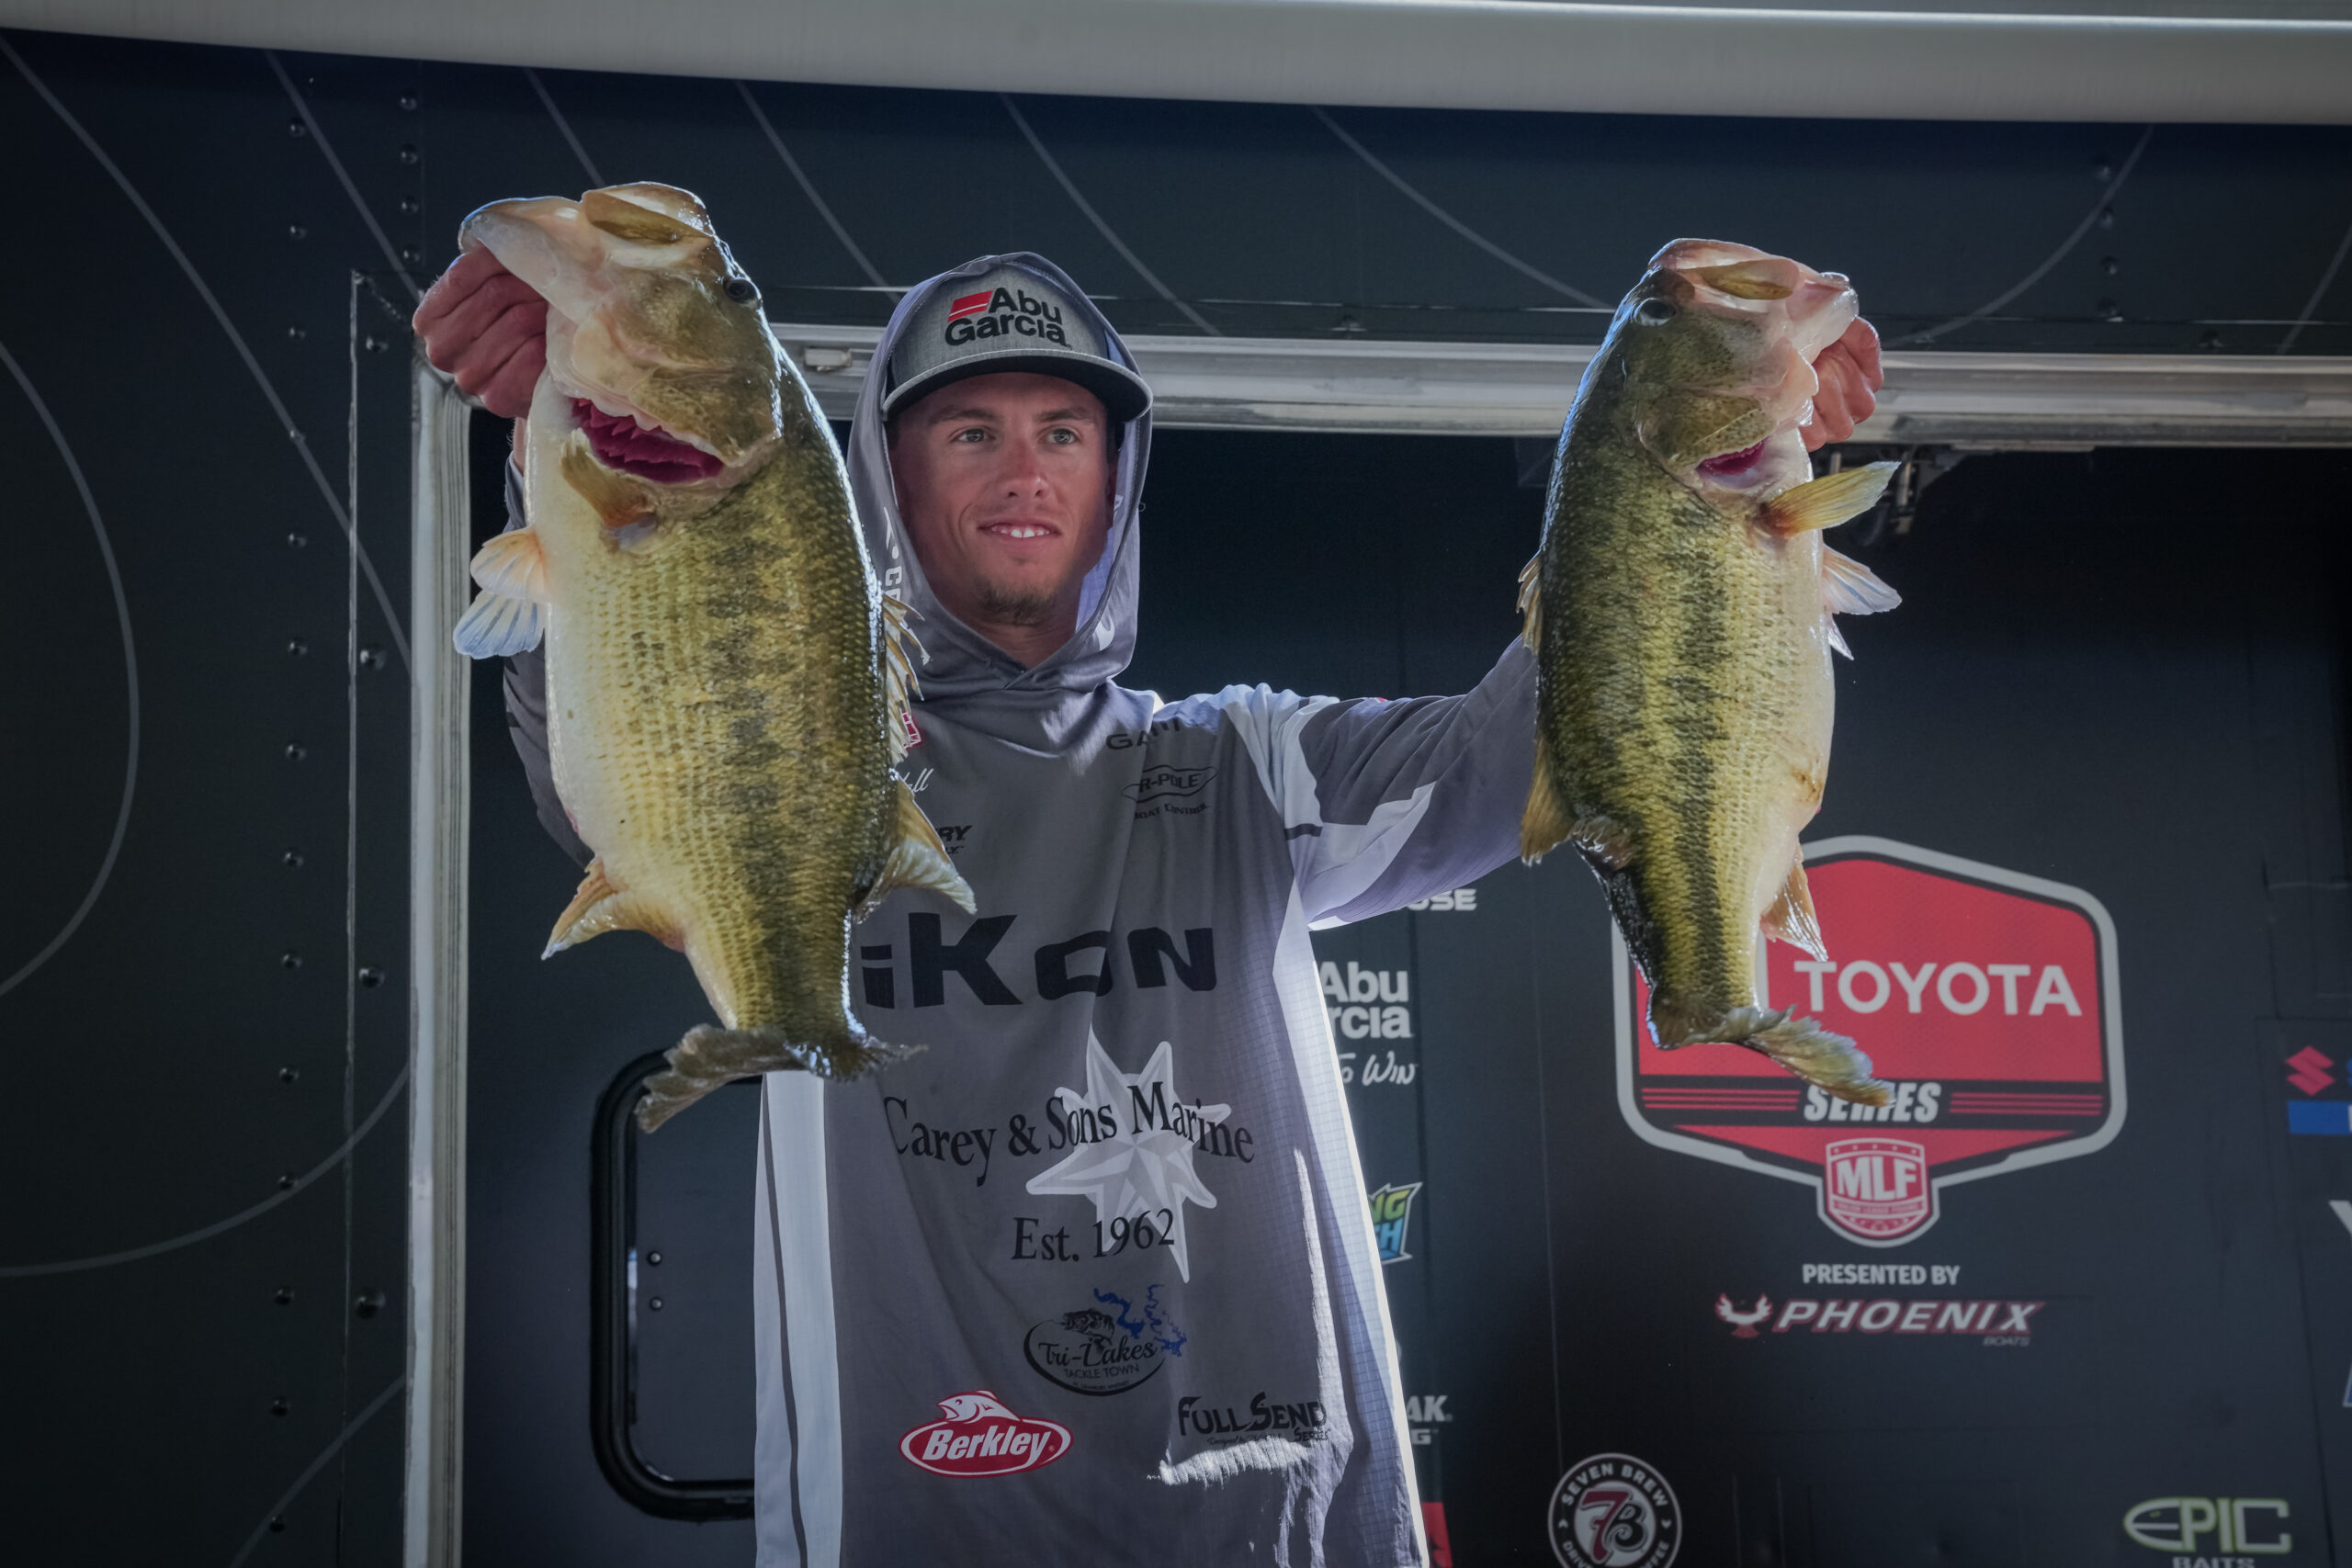 GALLERY: Turnover and big bass at the Day 2 weigh-in - Major League Fishing